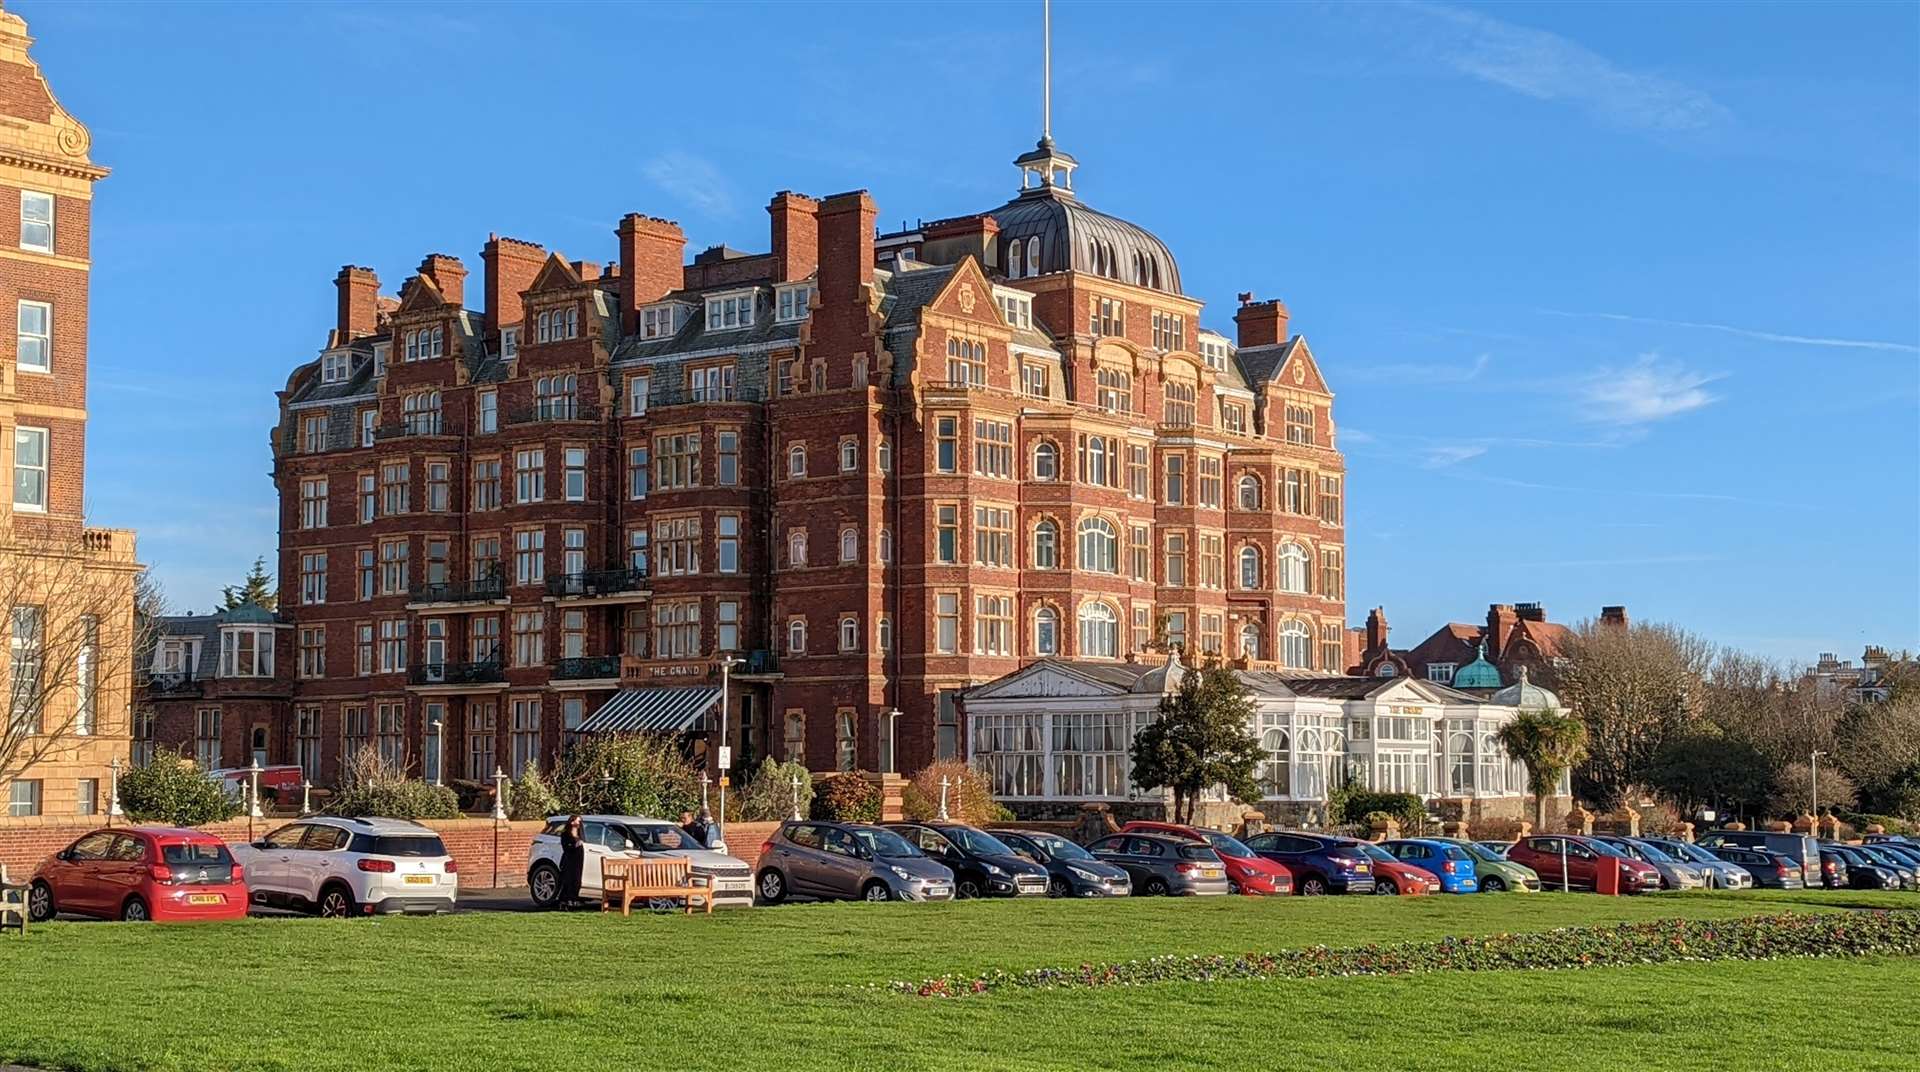 The Grand on The Leas in Folkestone is now owned by the residents